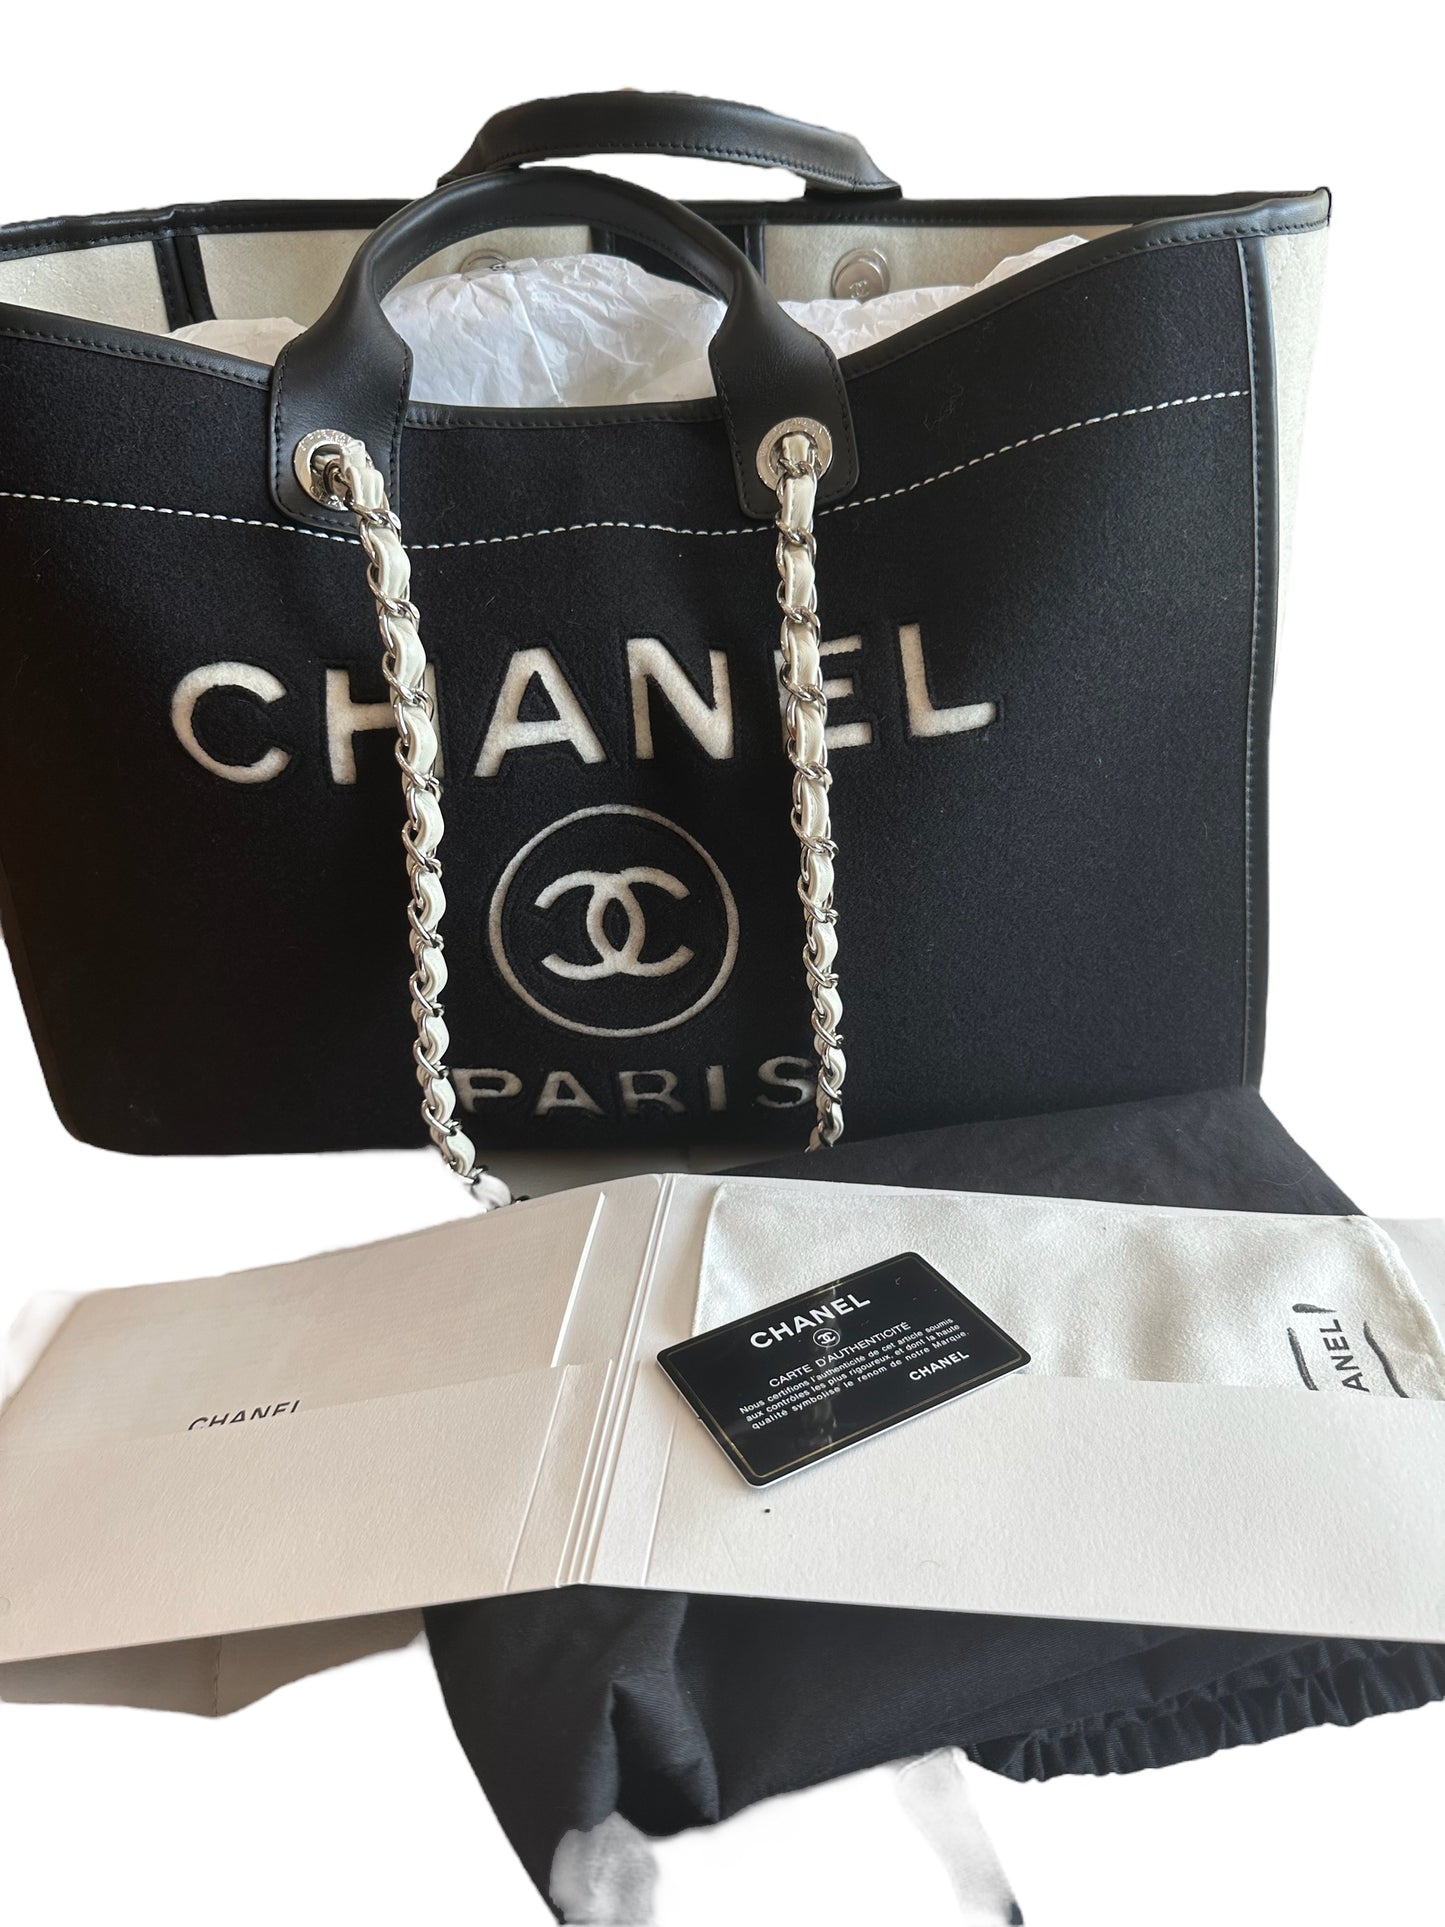 Chanel black and white felt/wool Deauville large